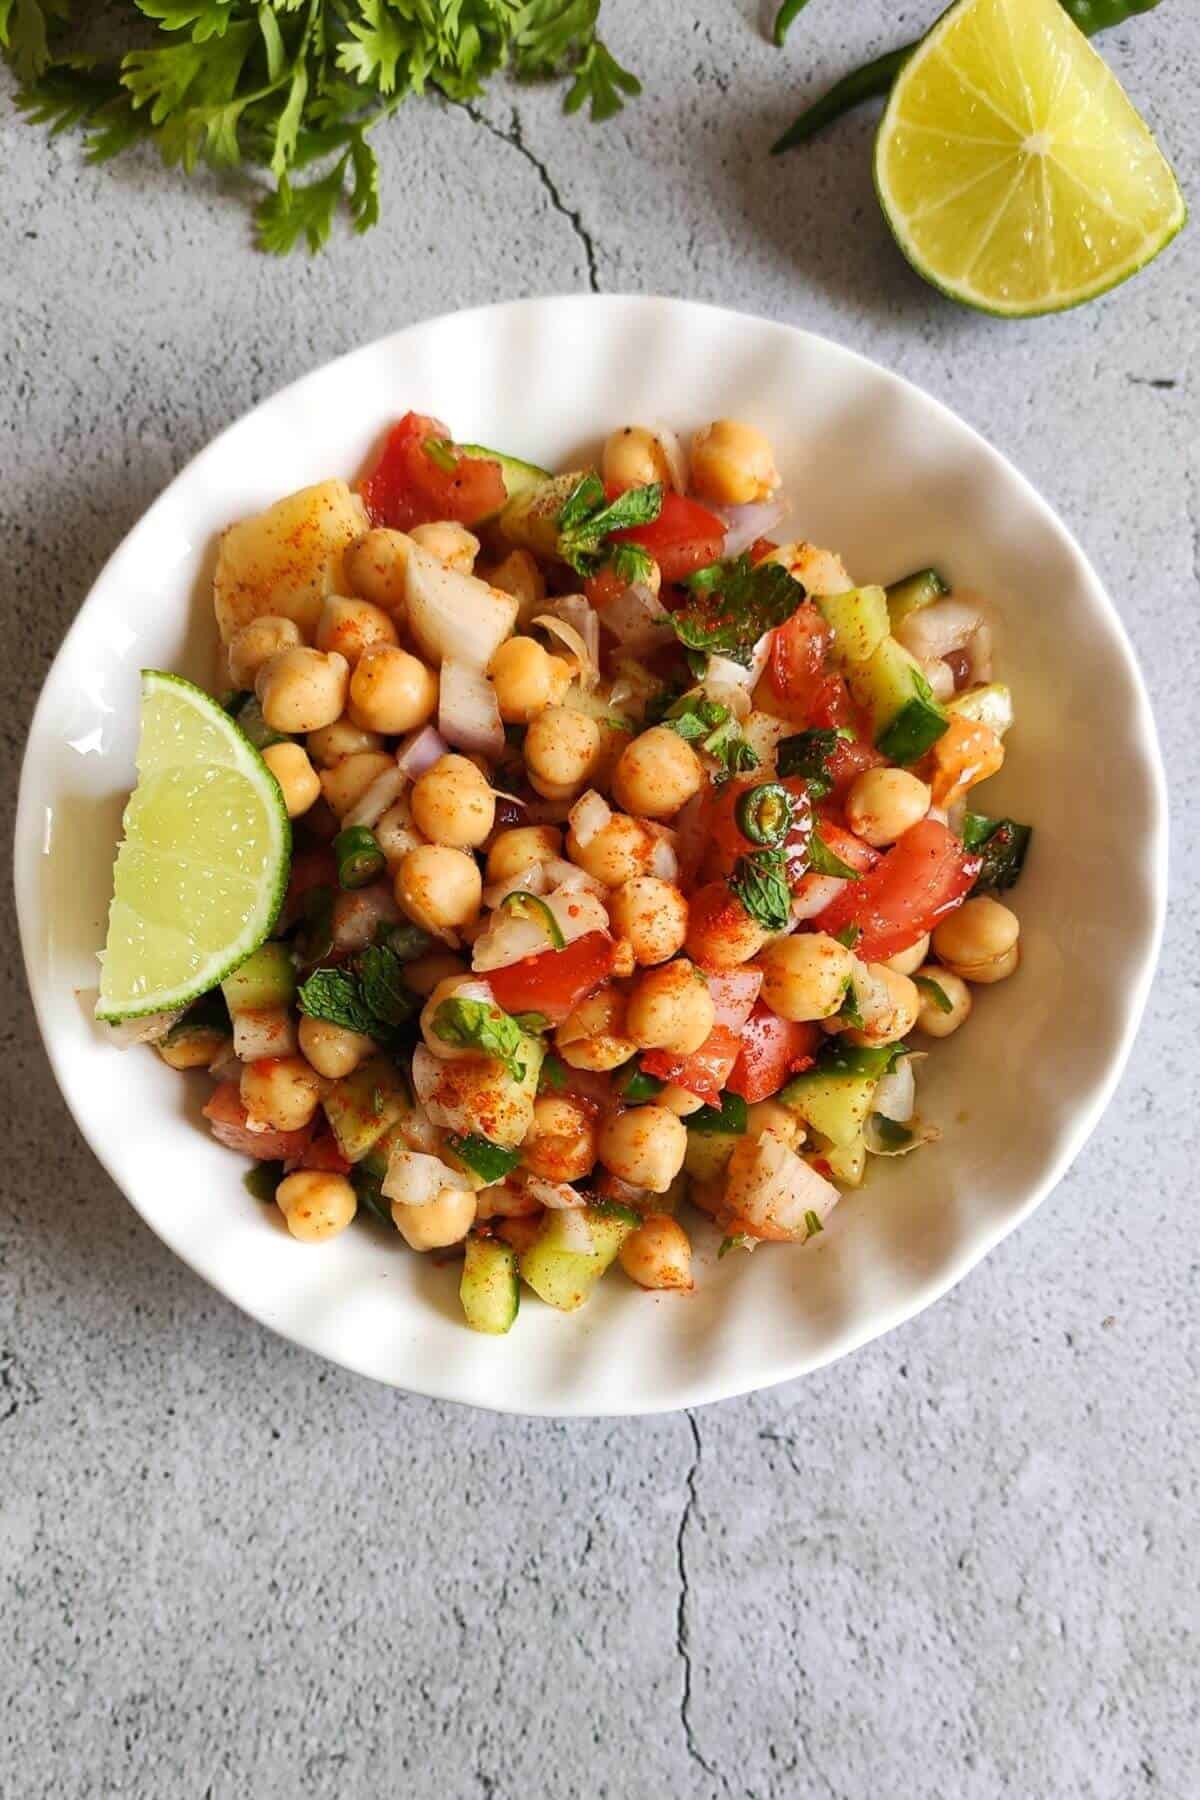 Chana salad garnished with a lime  wedge served in a white bowl